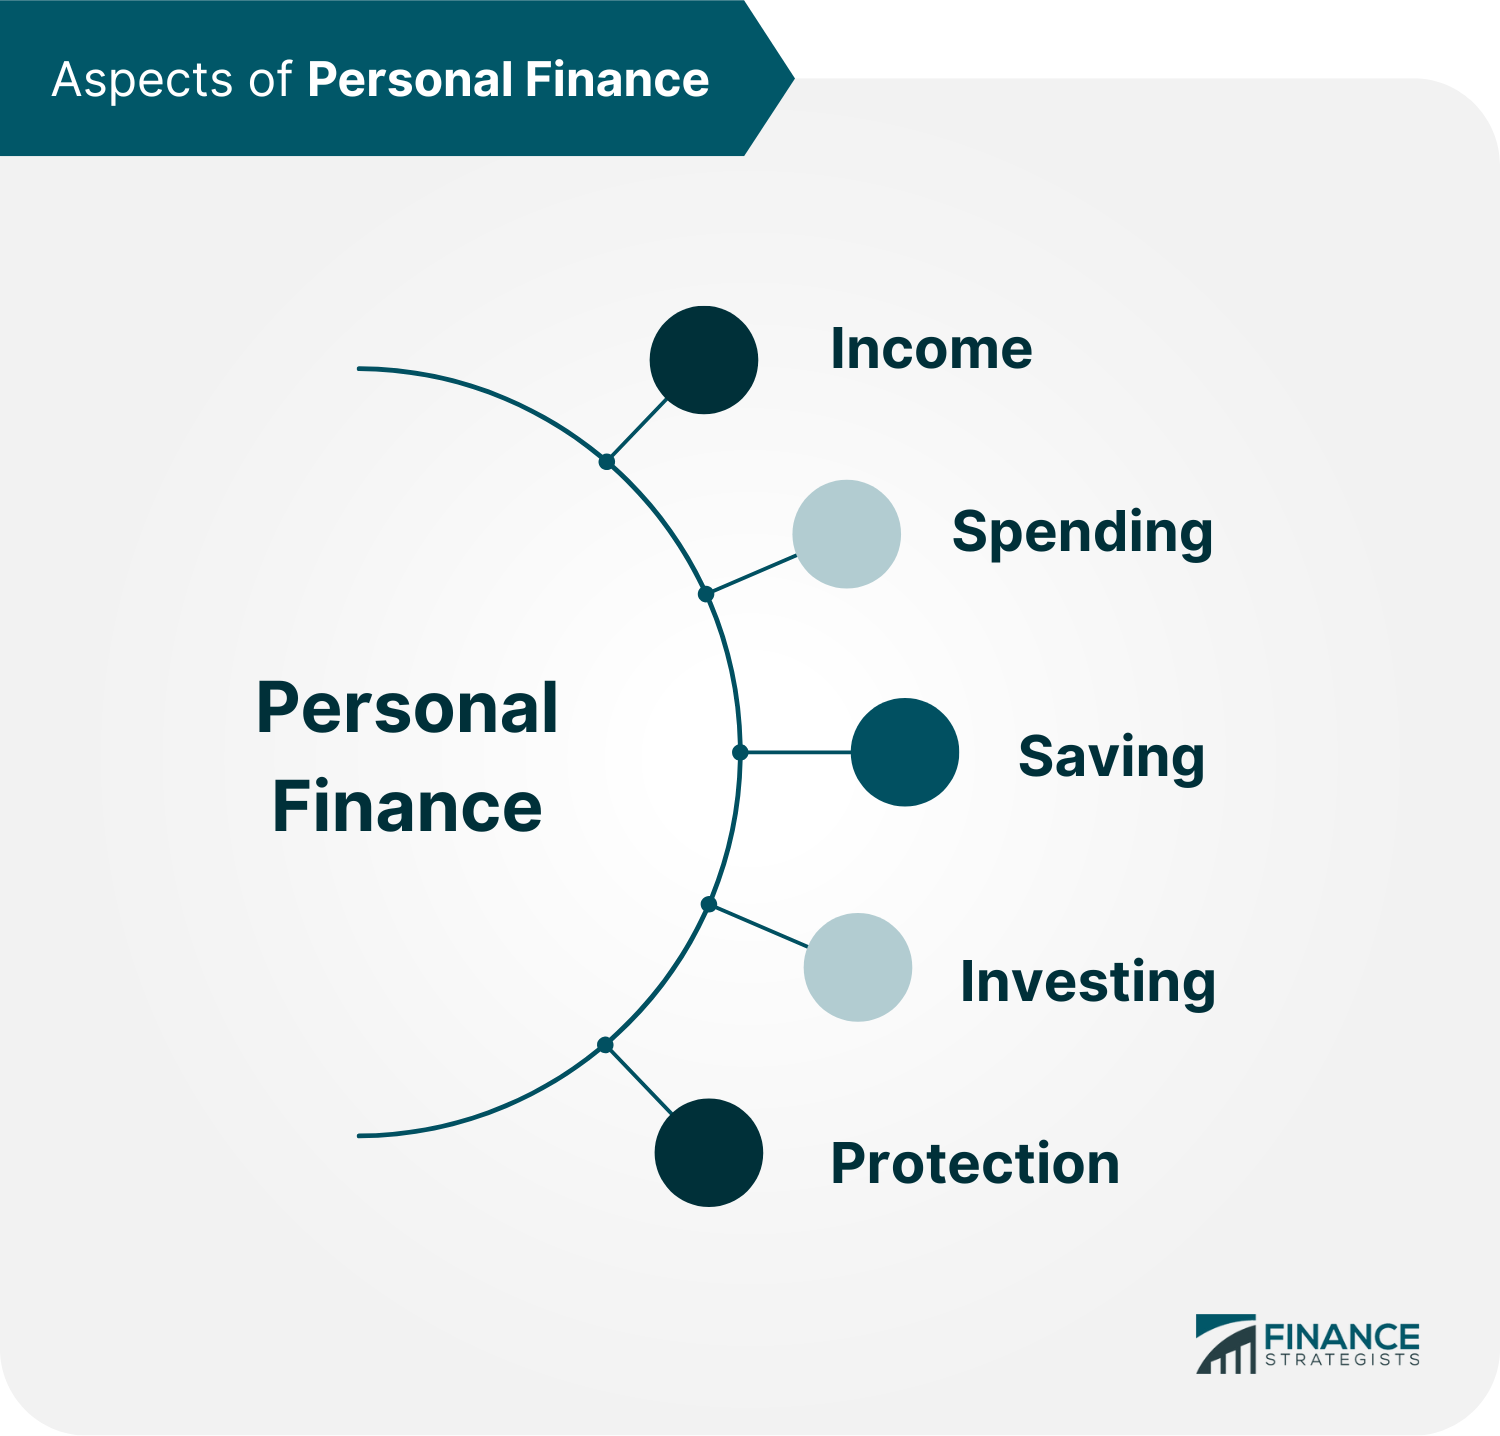 Aspects of Personal Finance